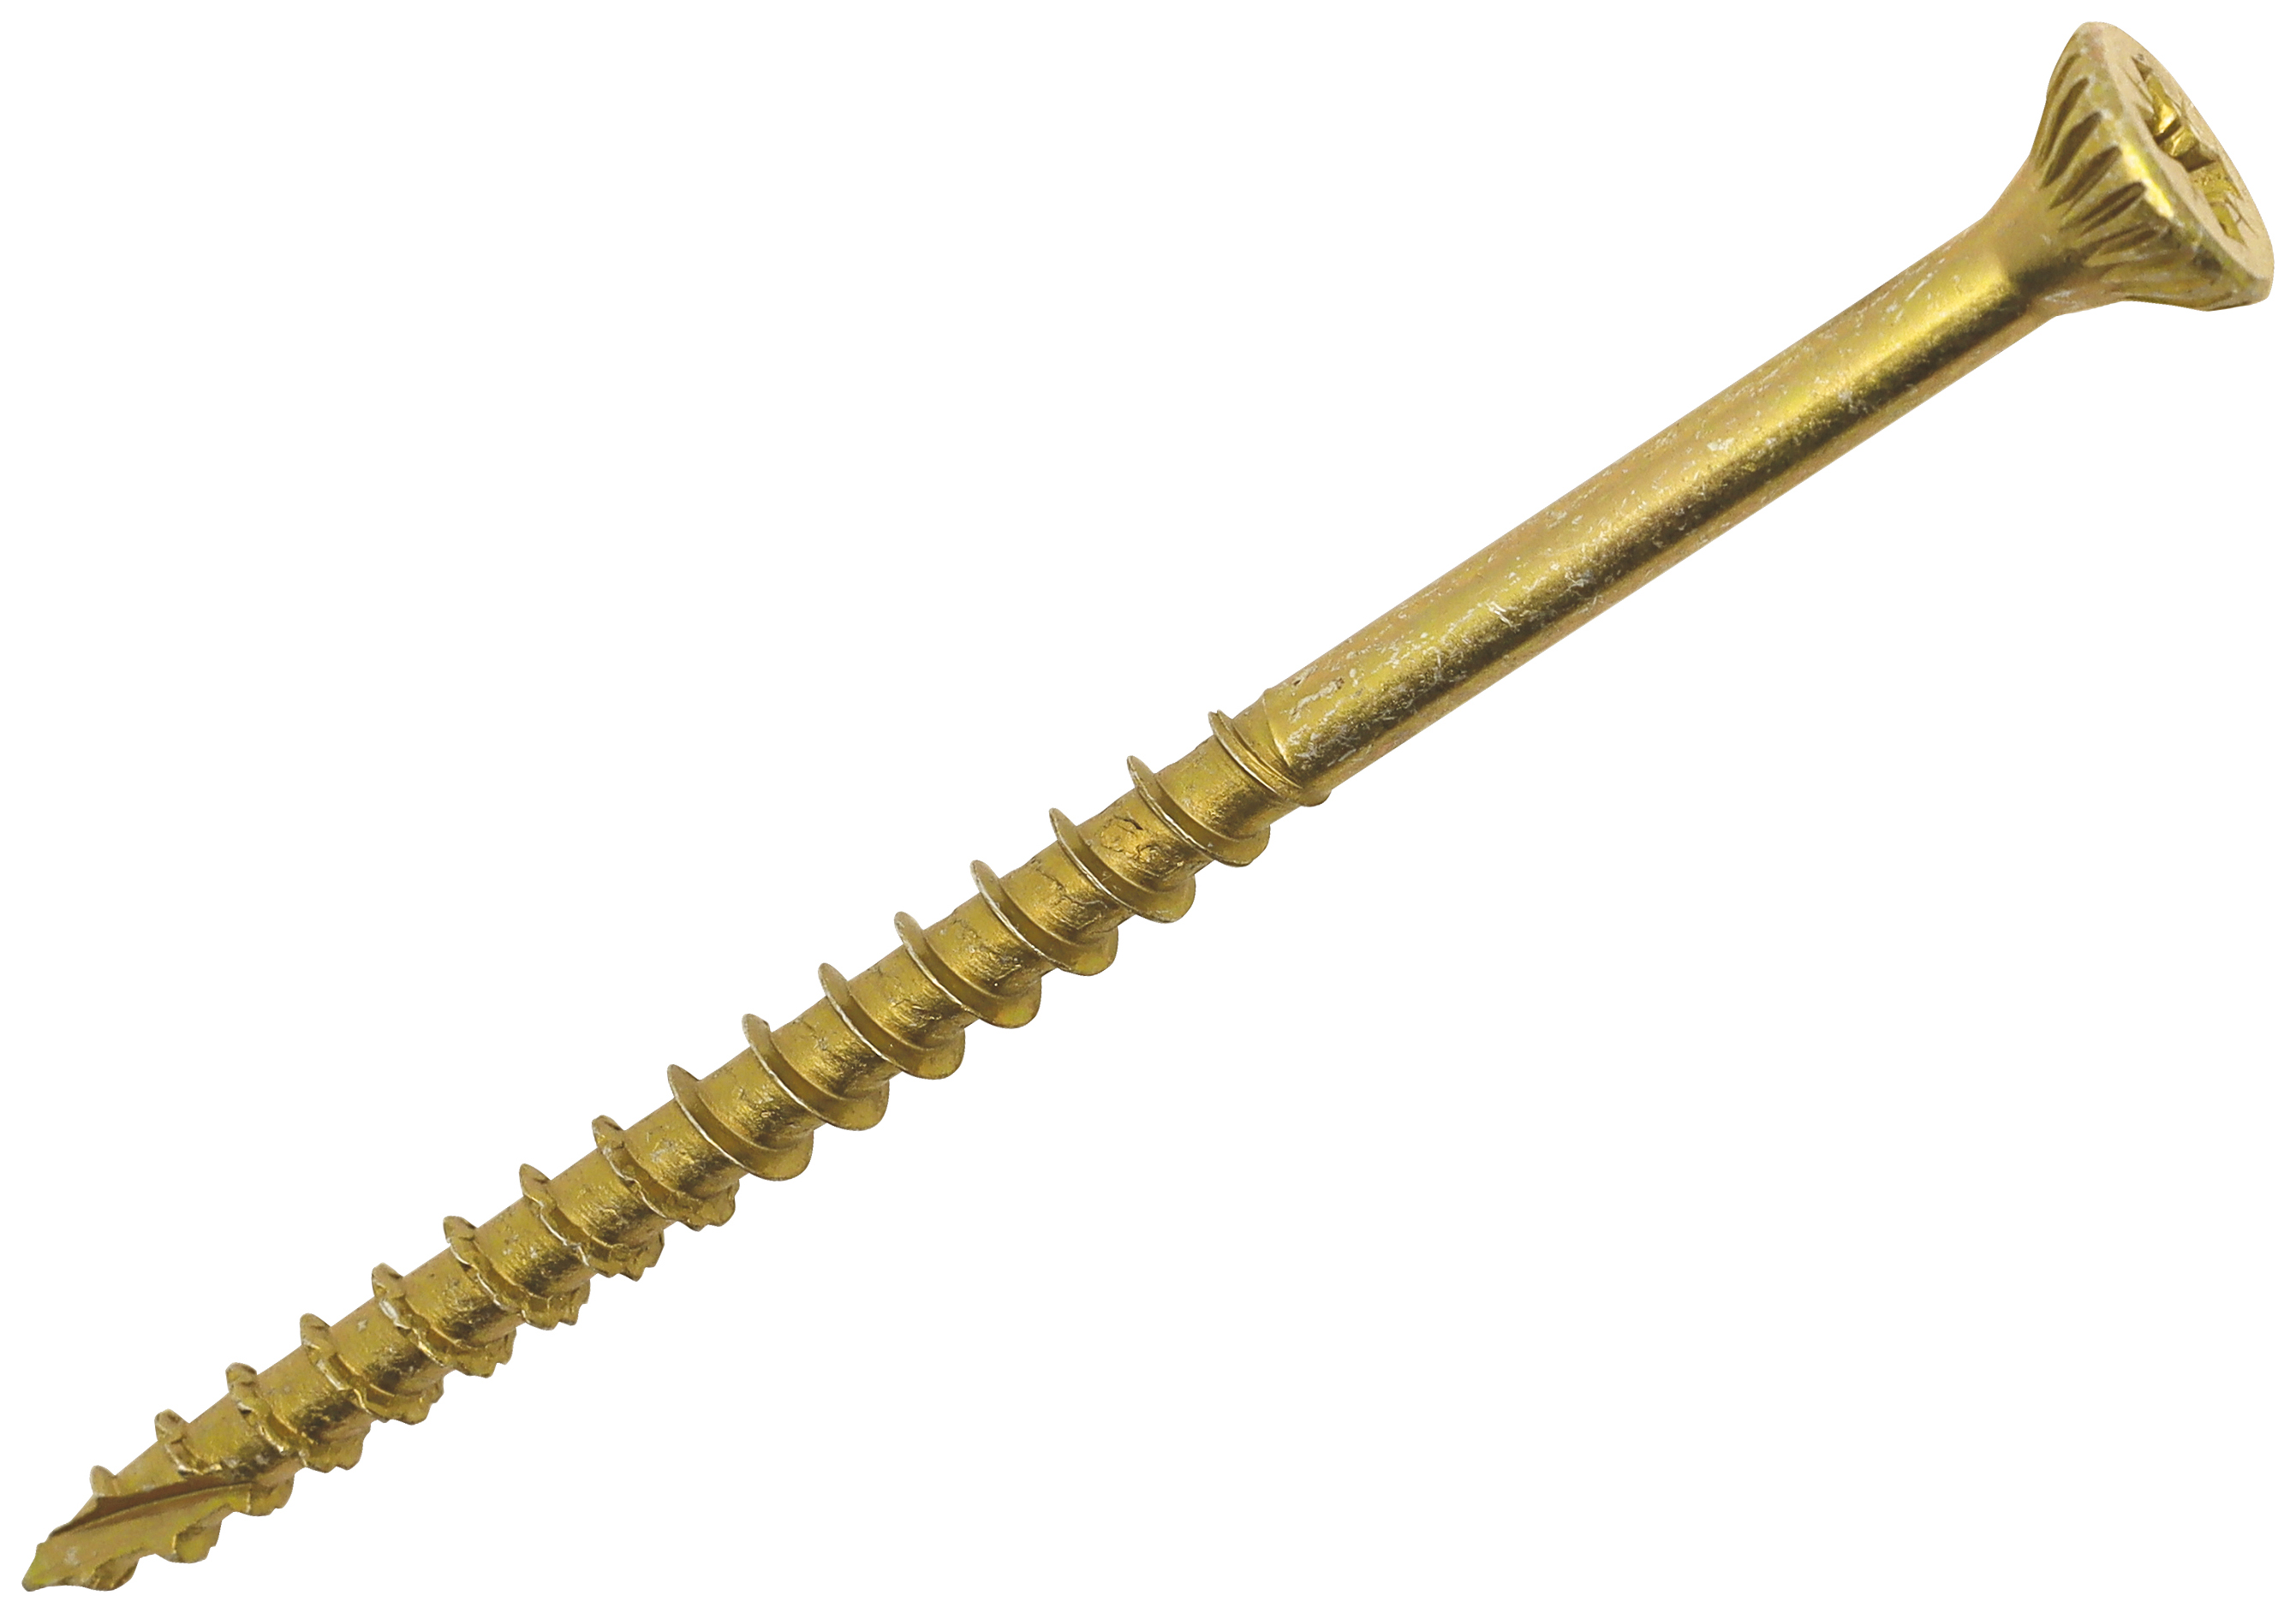 Optimaxx PZ Countersunk Passivated Double Reinforced Wood Screw - 6 x 100mm - Pack of 100